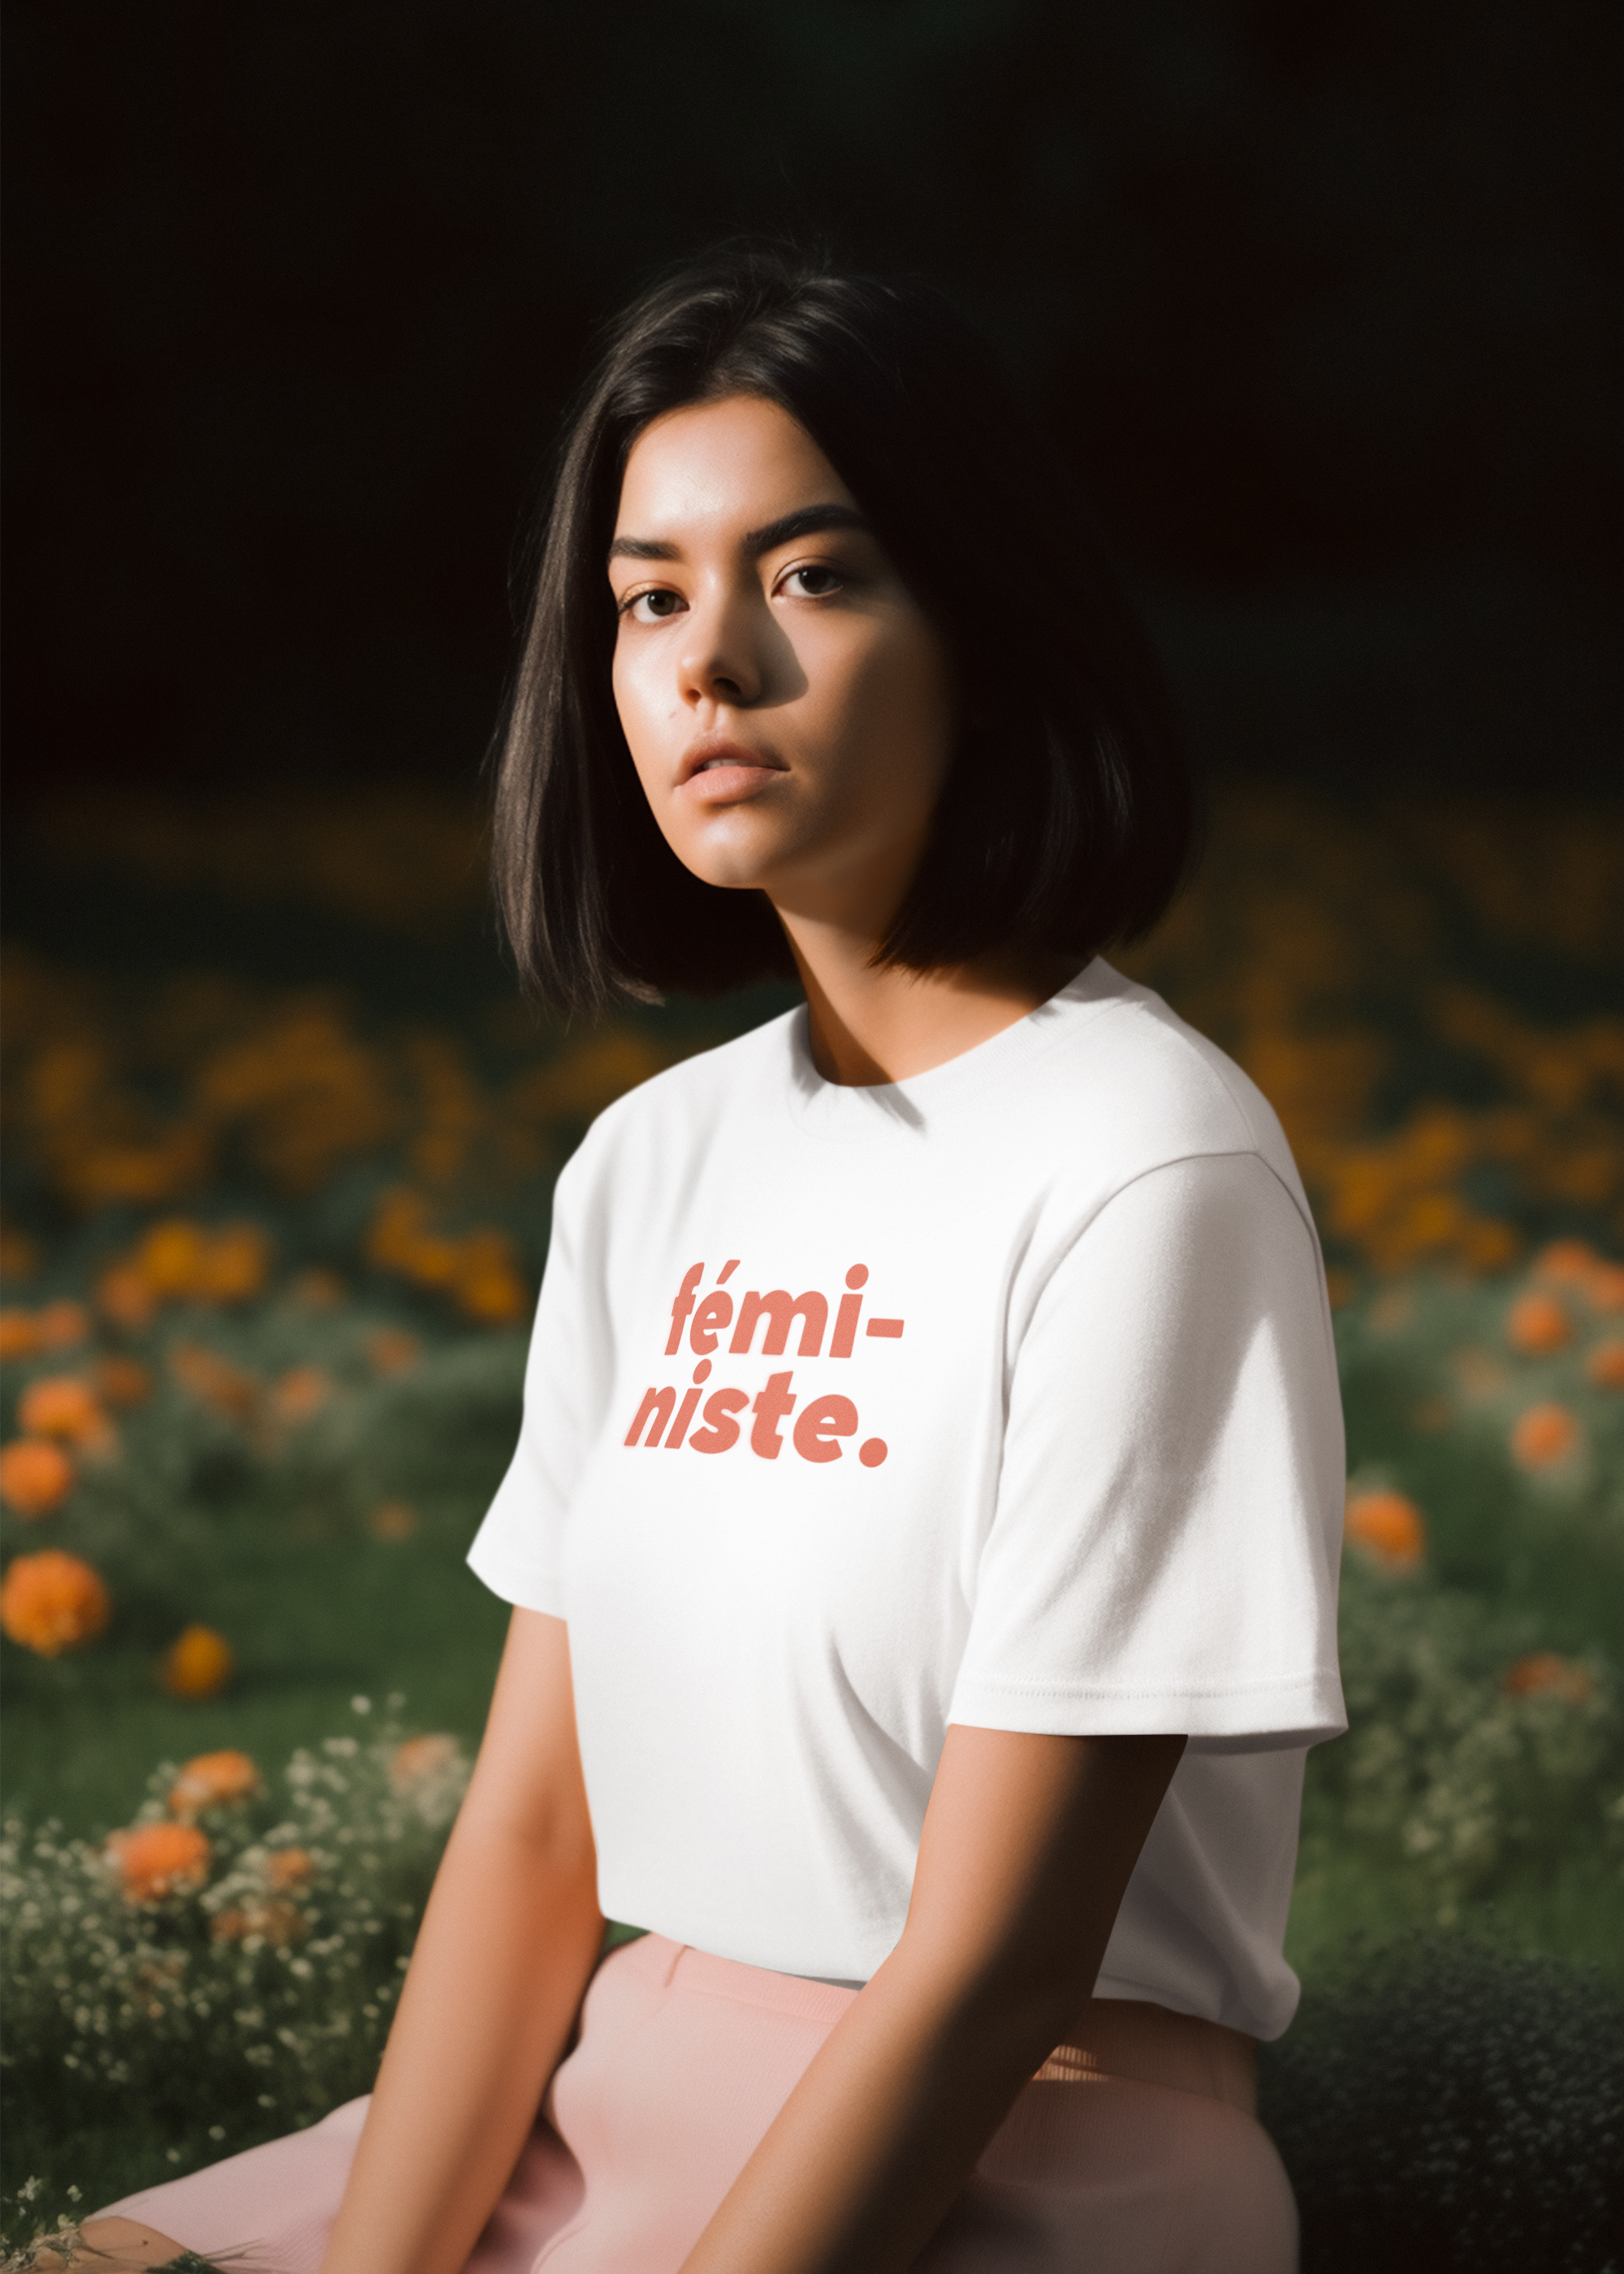 t-shirt-mockup-of-an-ai-created-woman-sitting-in-a-garden-with-flowers-m33779.png